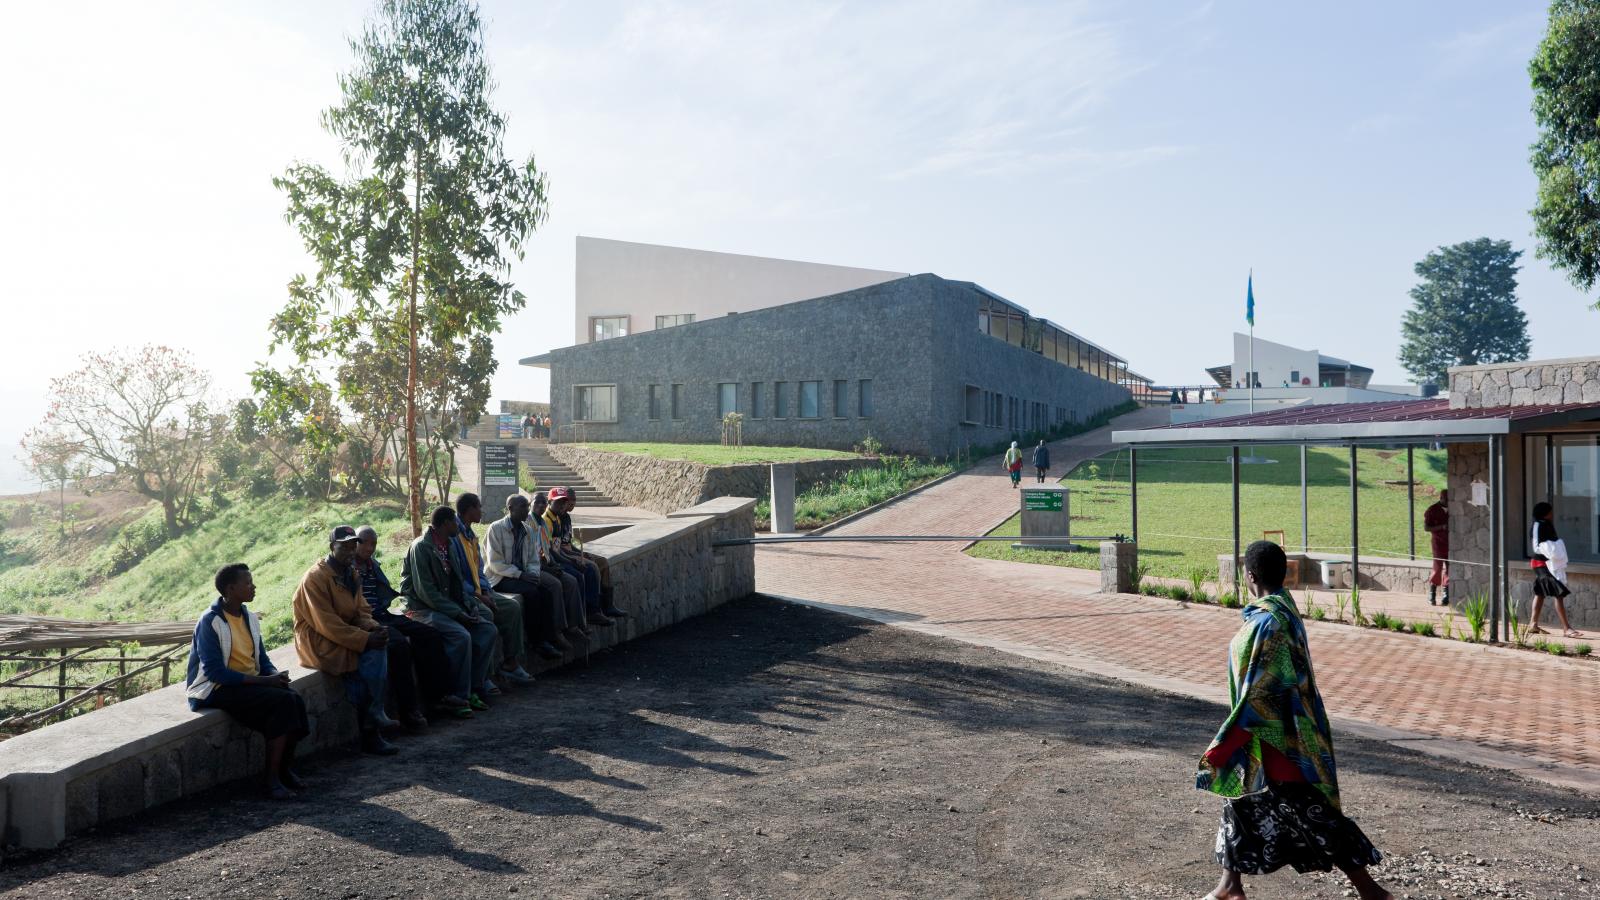 People sit on a stone bench as another walk by outside of a hospital in Rwanda